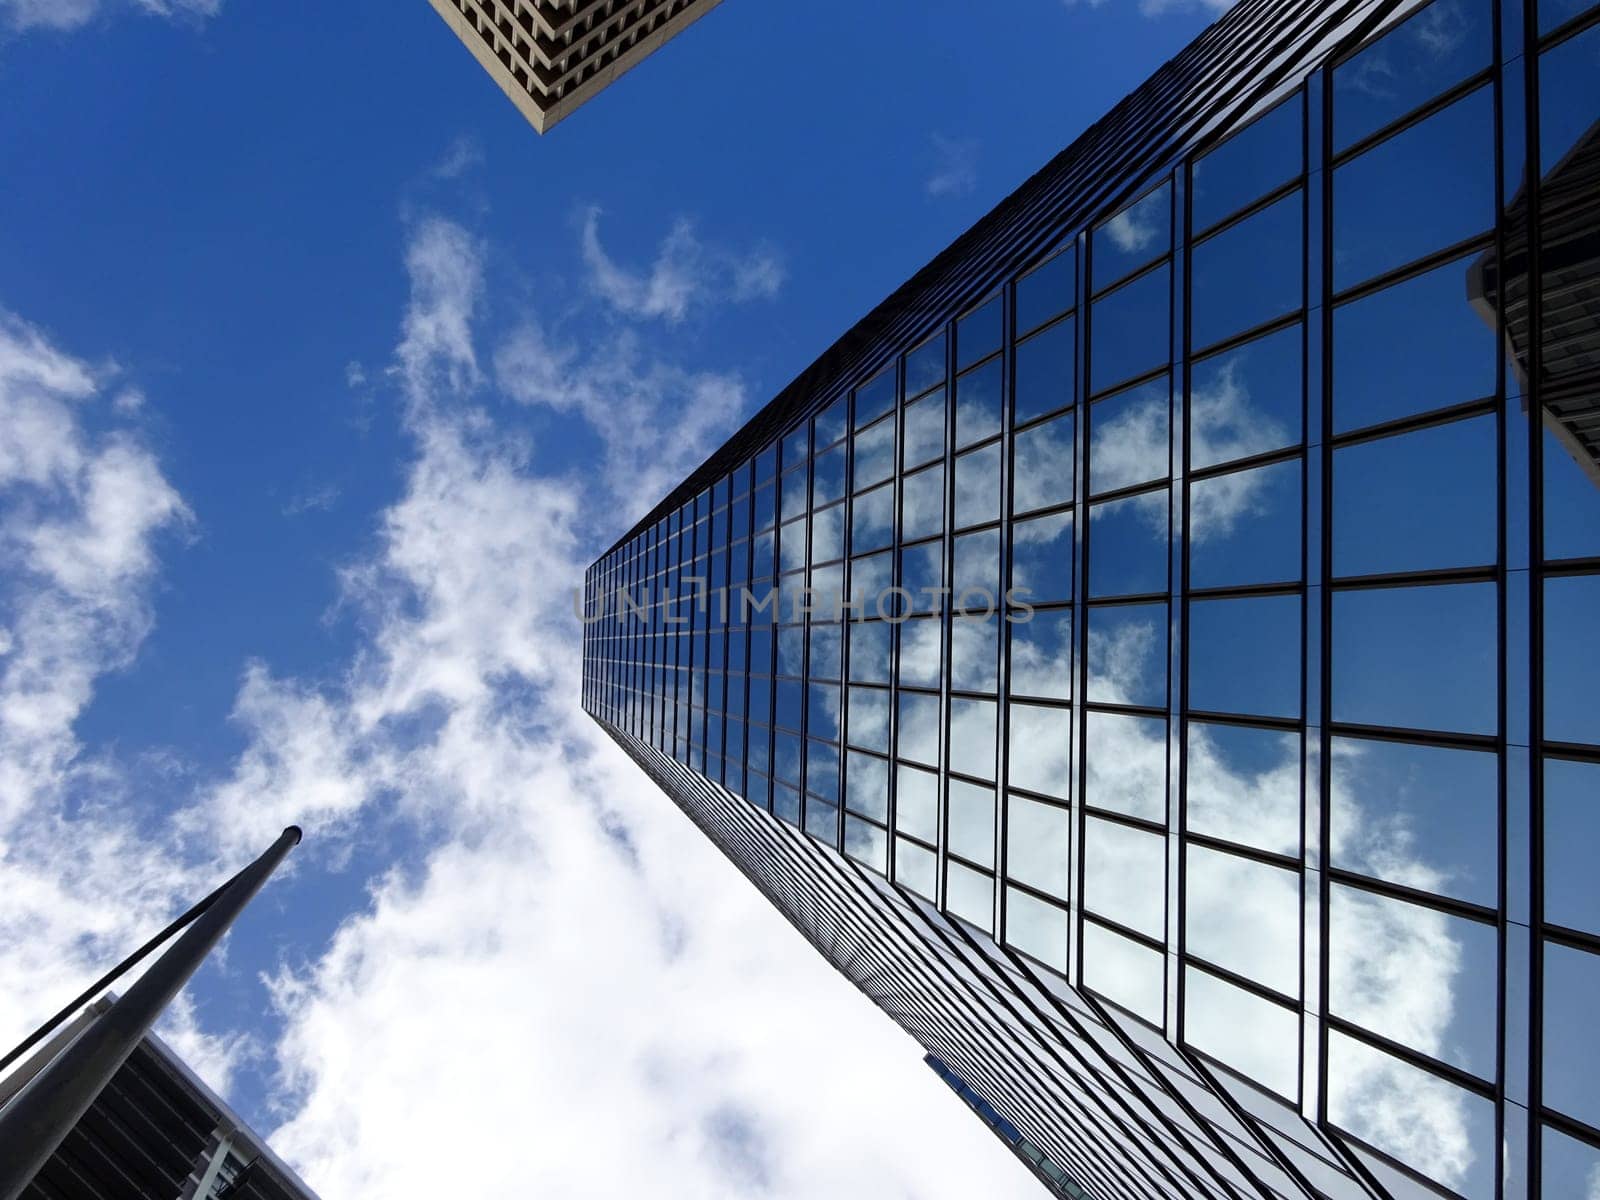 Honolulu - December 29, 2014: Glass building in downtown Honolulu, Hawaii. The building is reflecting the blue sky and white clouds. The photo is taken from a low angle, looking up at the building. The building is surrounded by other tall buildings. The photo shows the modern and urban architecture of Honolulu.